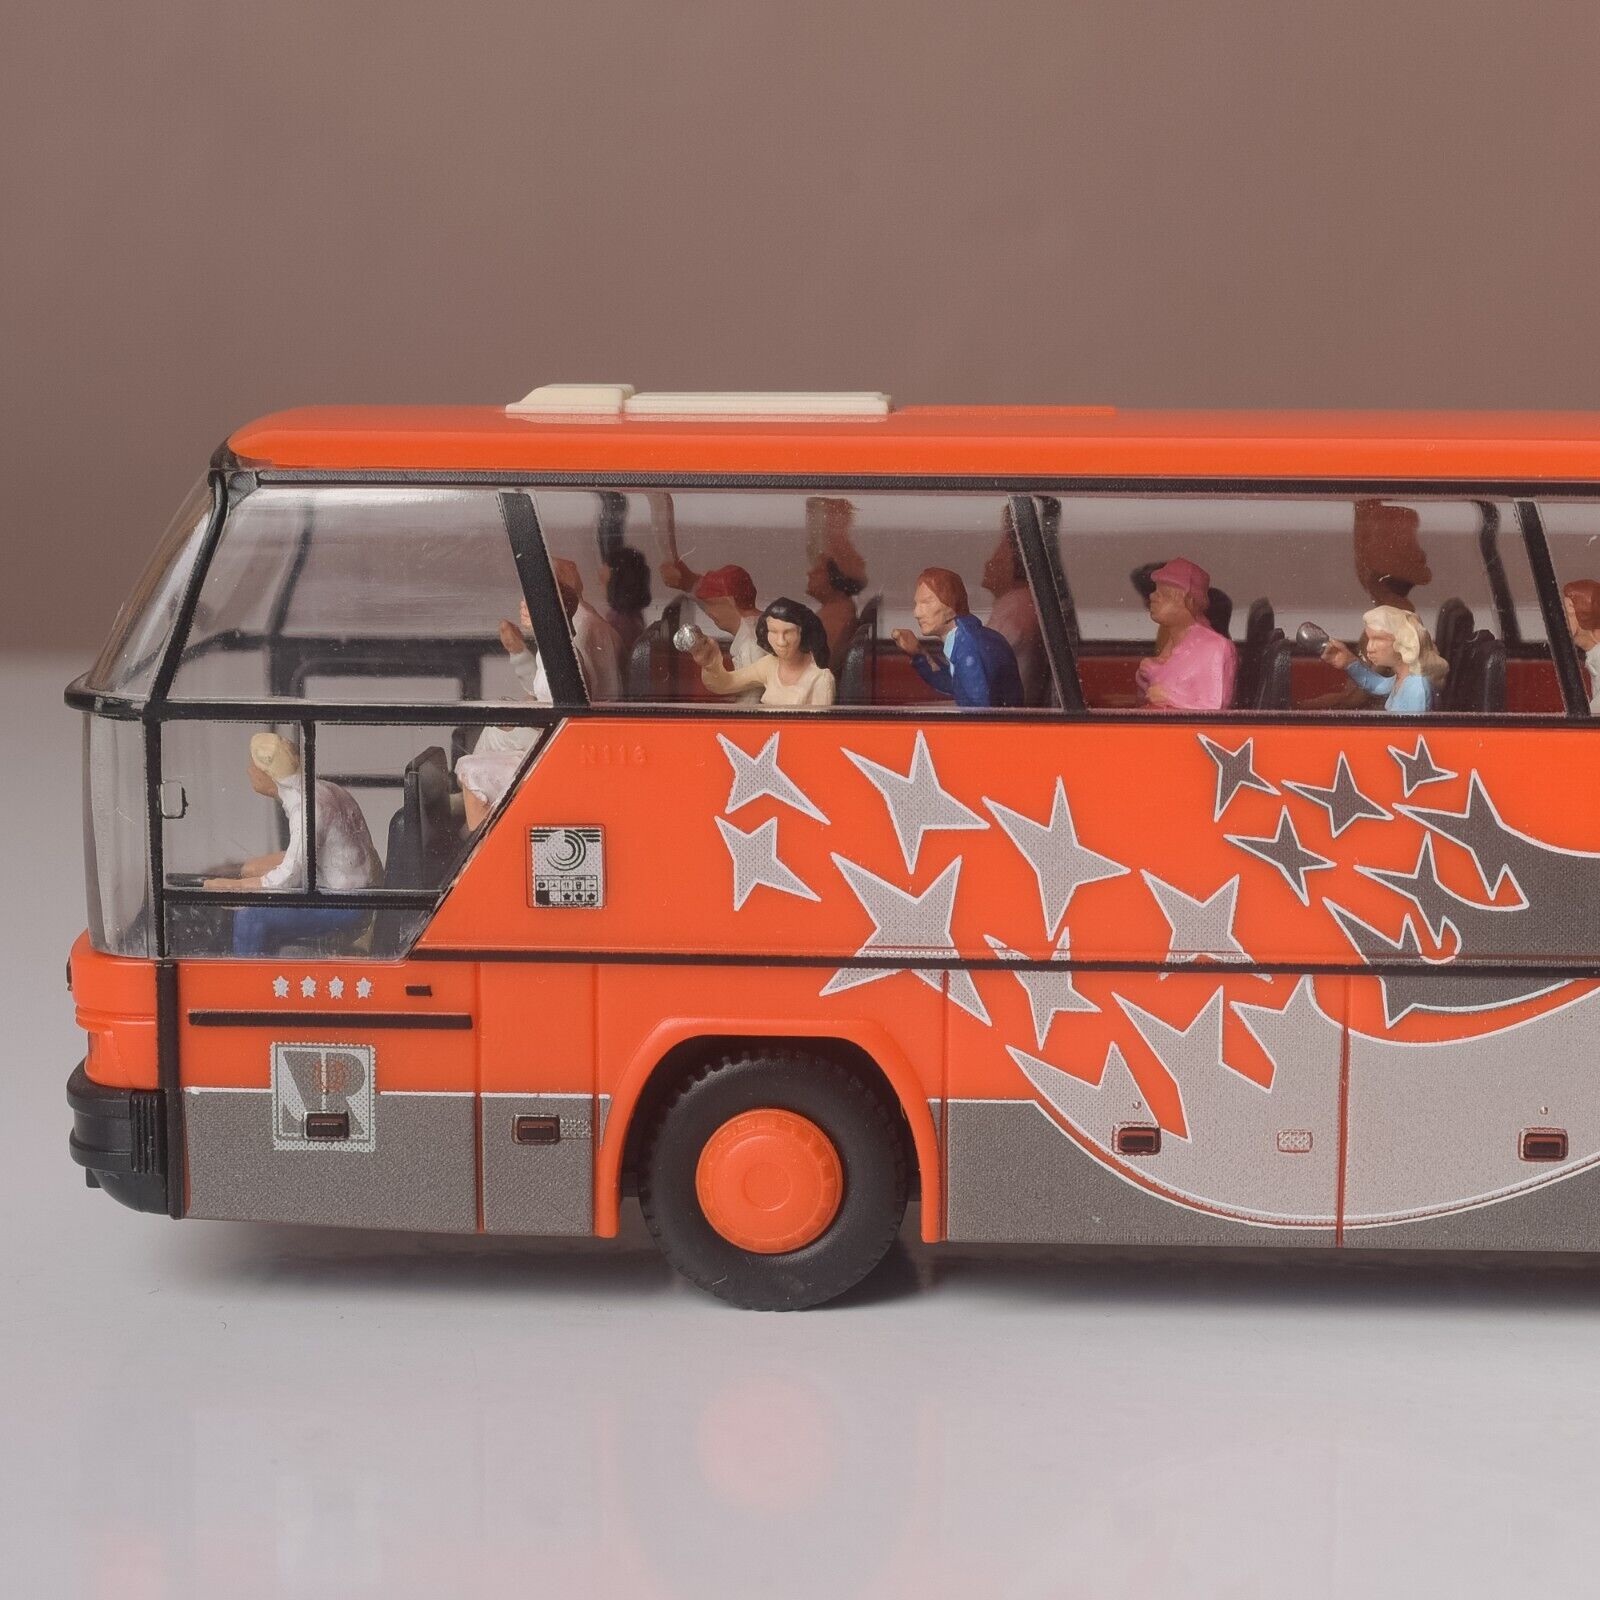 ::Preiser 33204 Neoplan Cityliner Bus With 30 Miniature Figures, Jungblut With Box